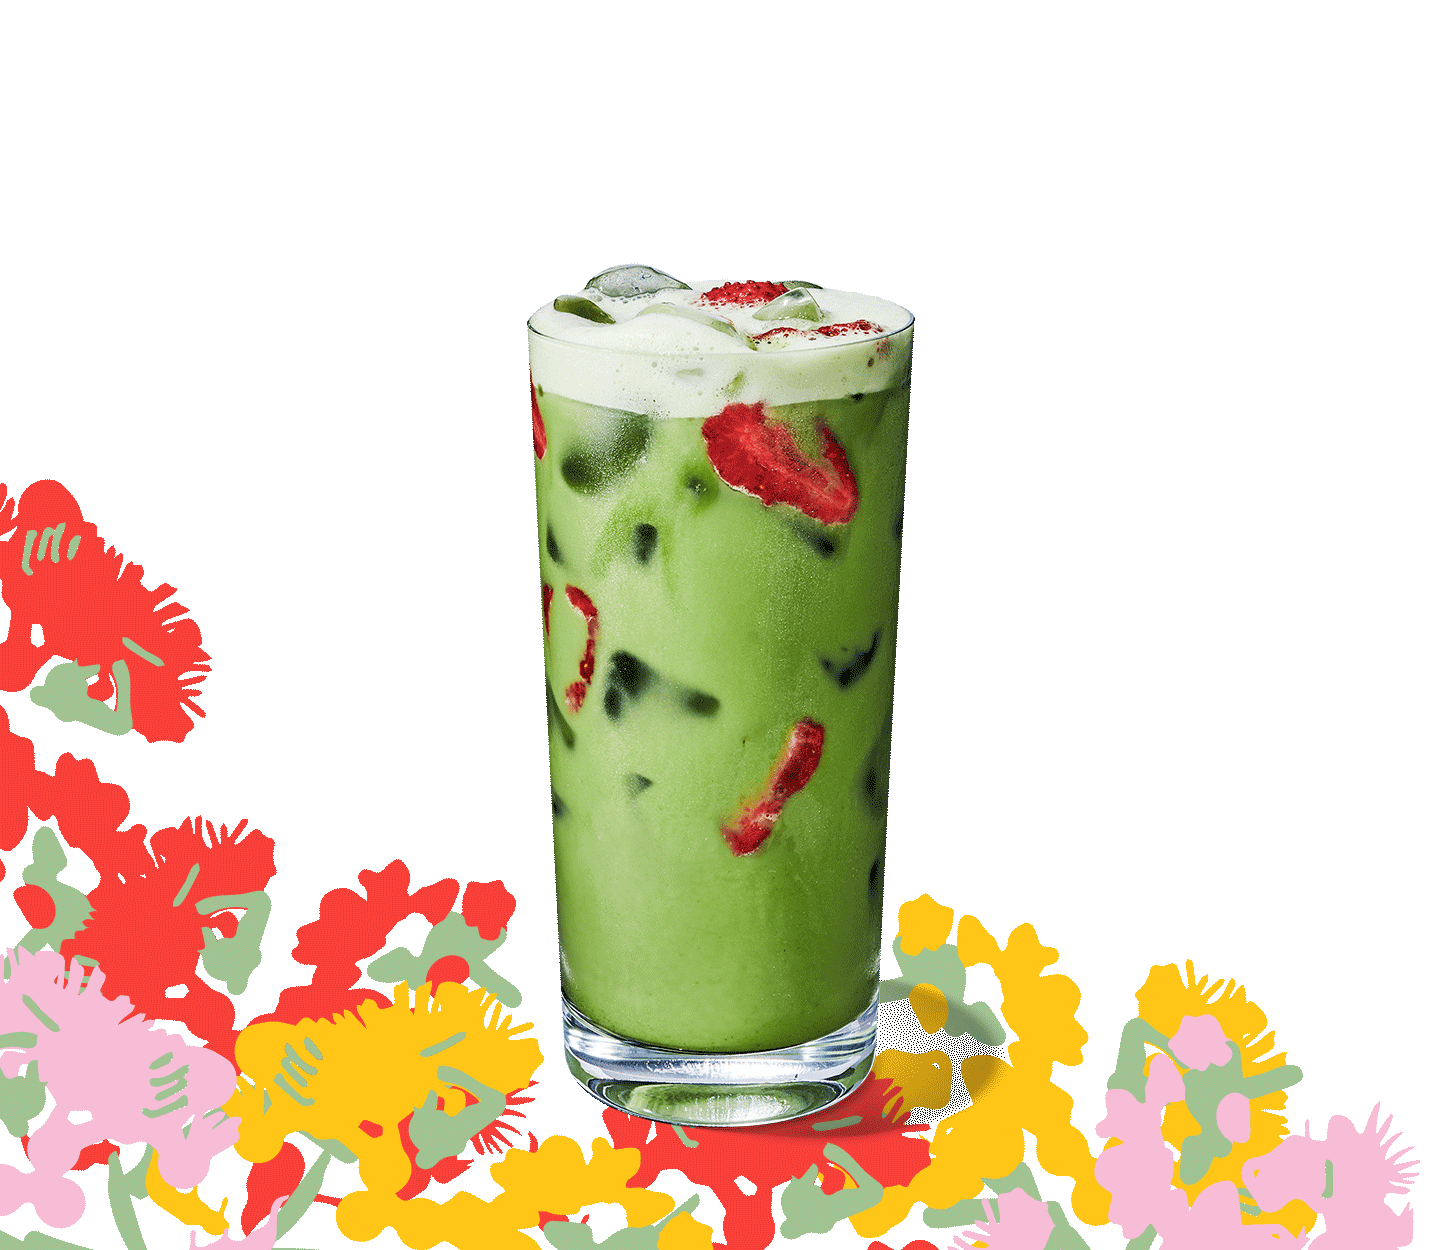 Iced green tea drink with strawberry inclusions in a tall glass.